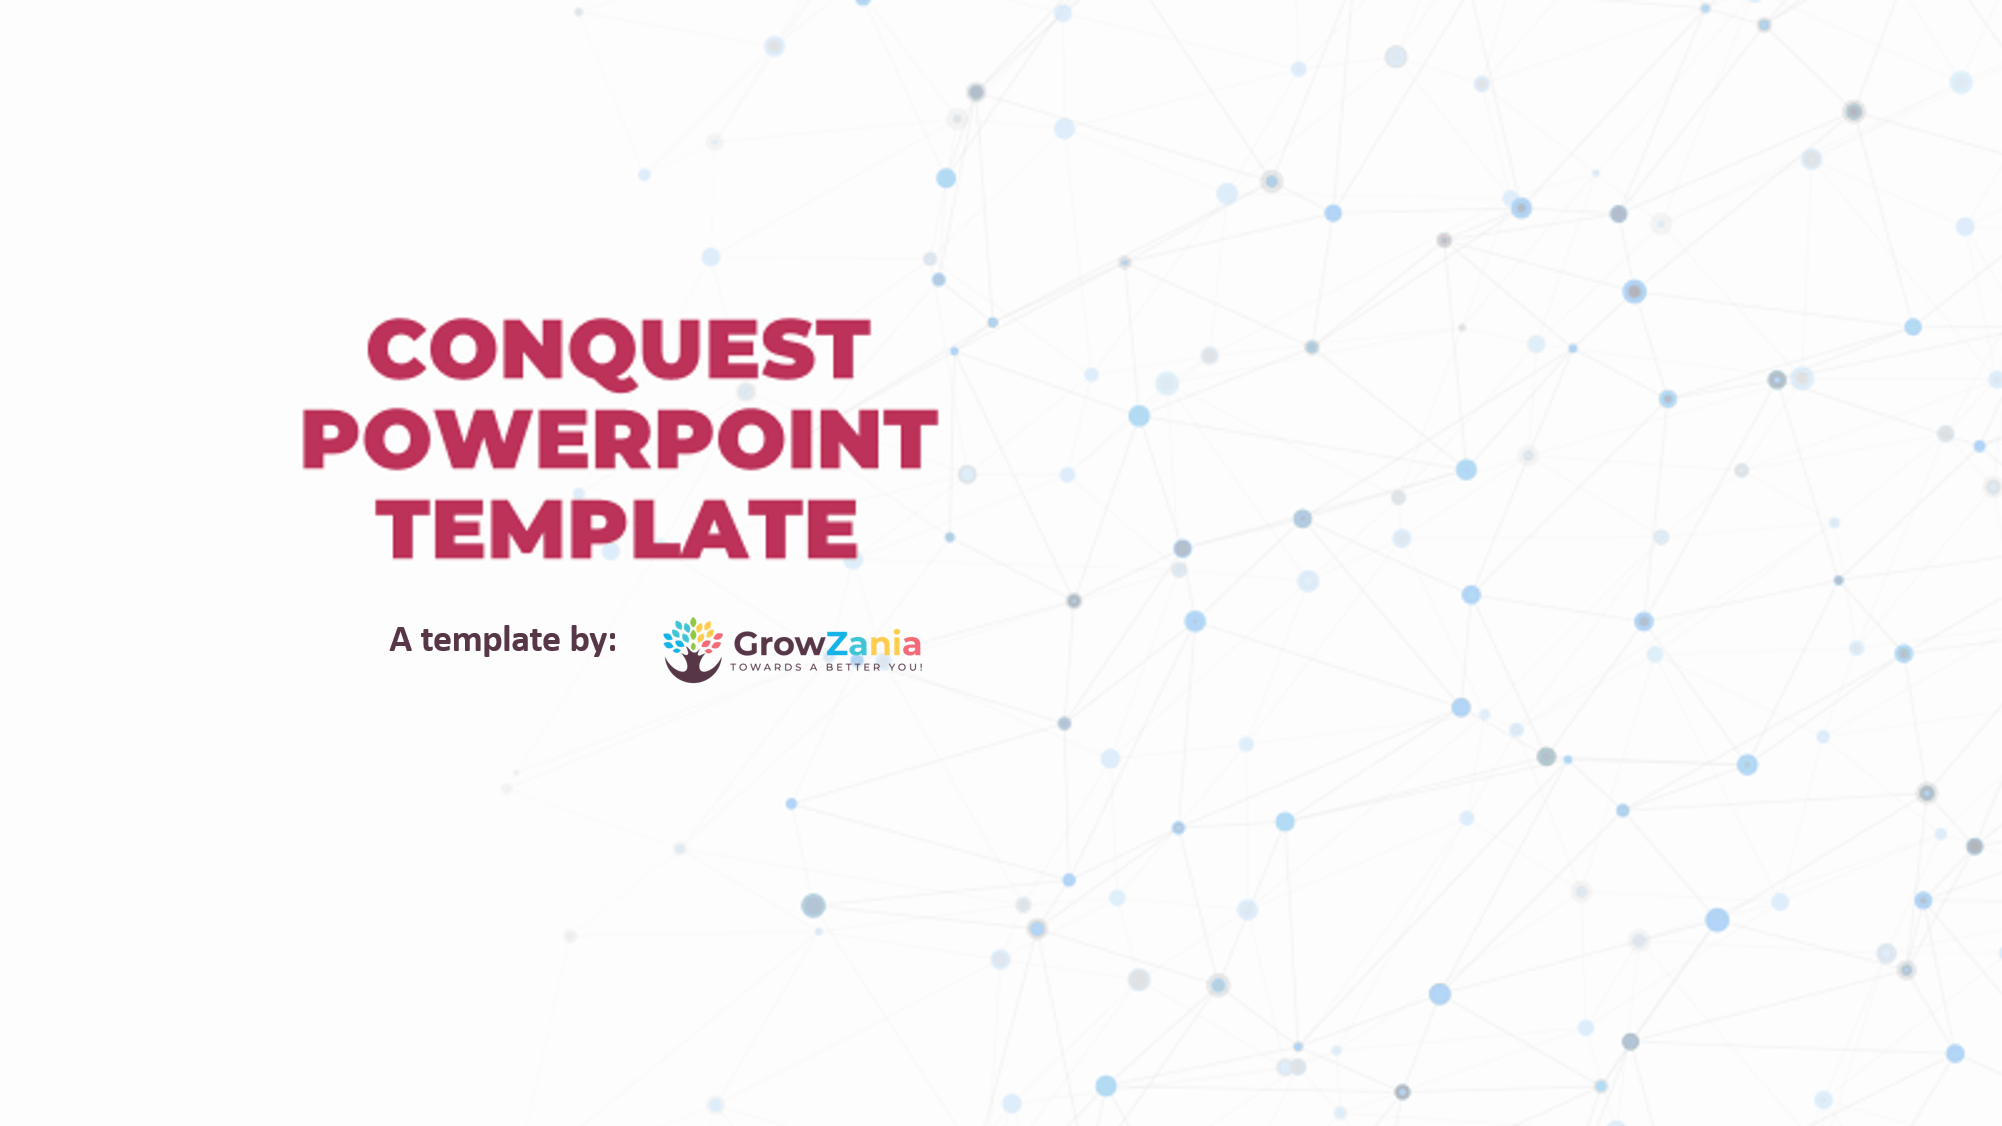 011 - Conquest PowerPoint Template